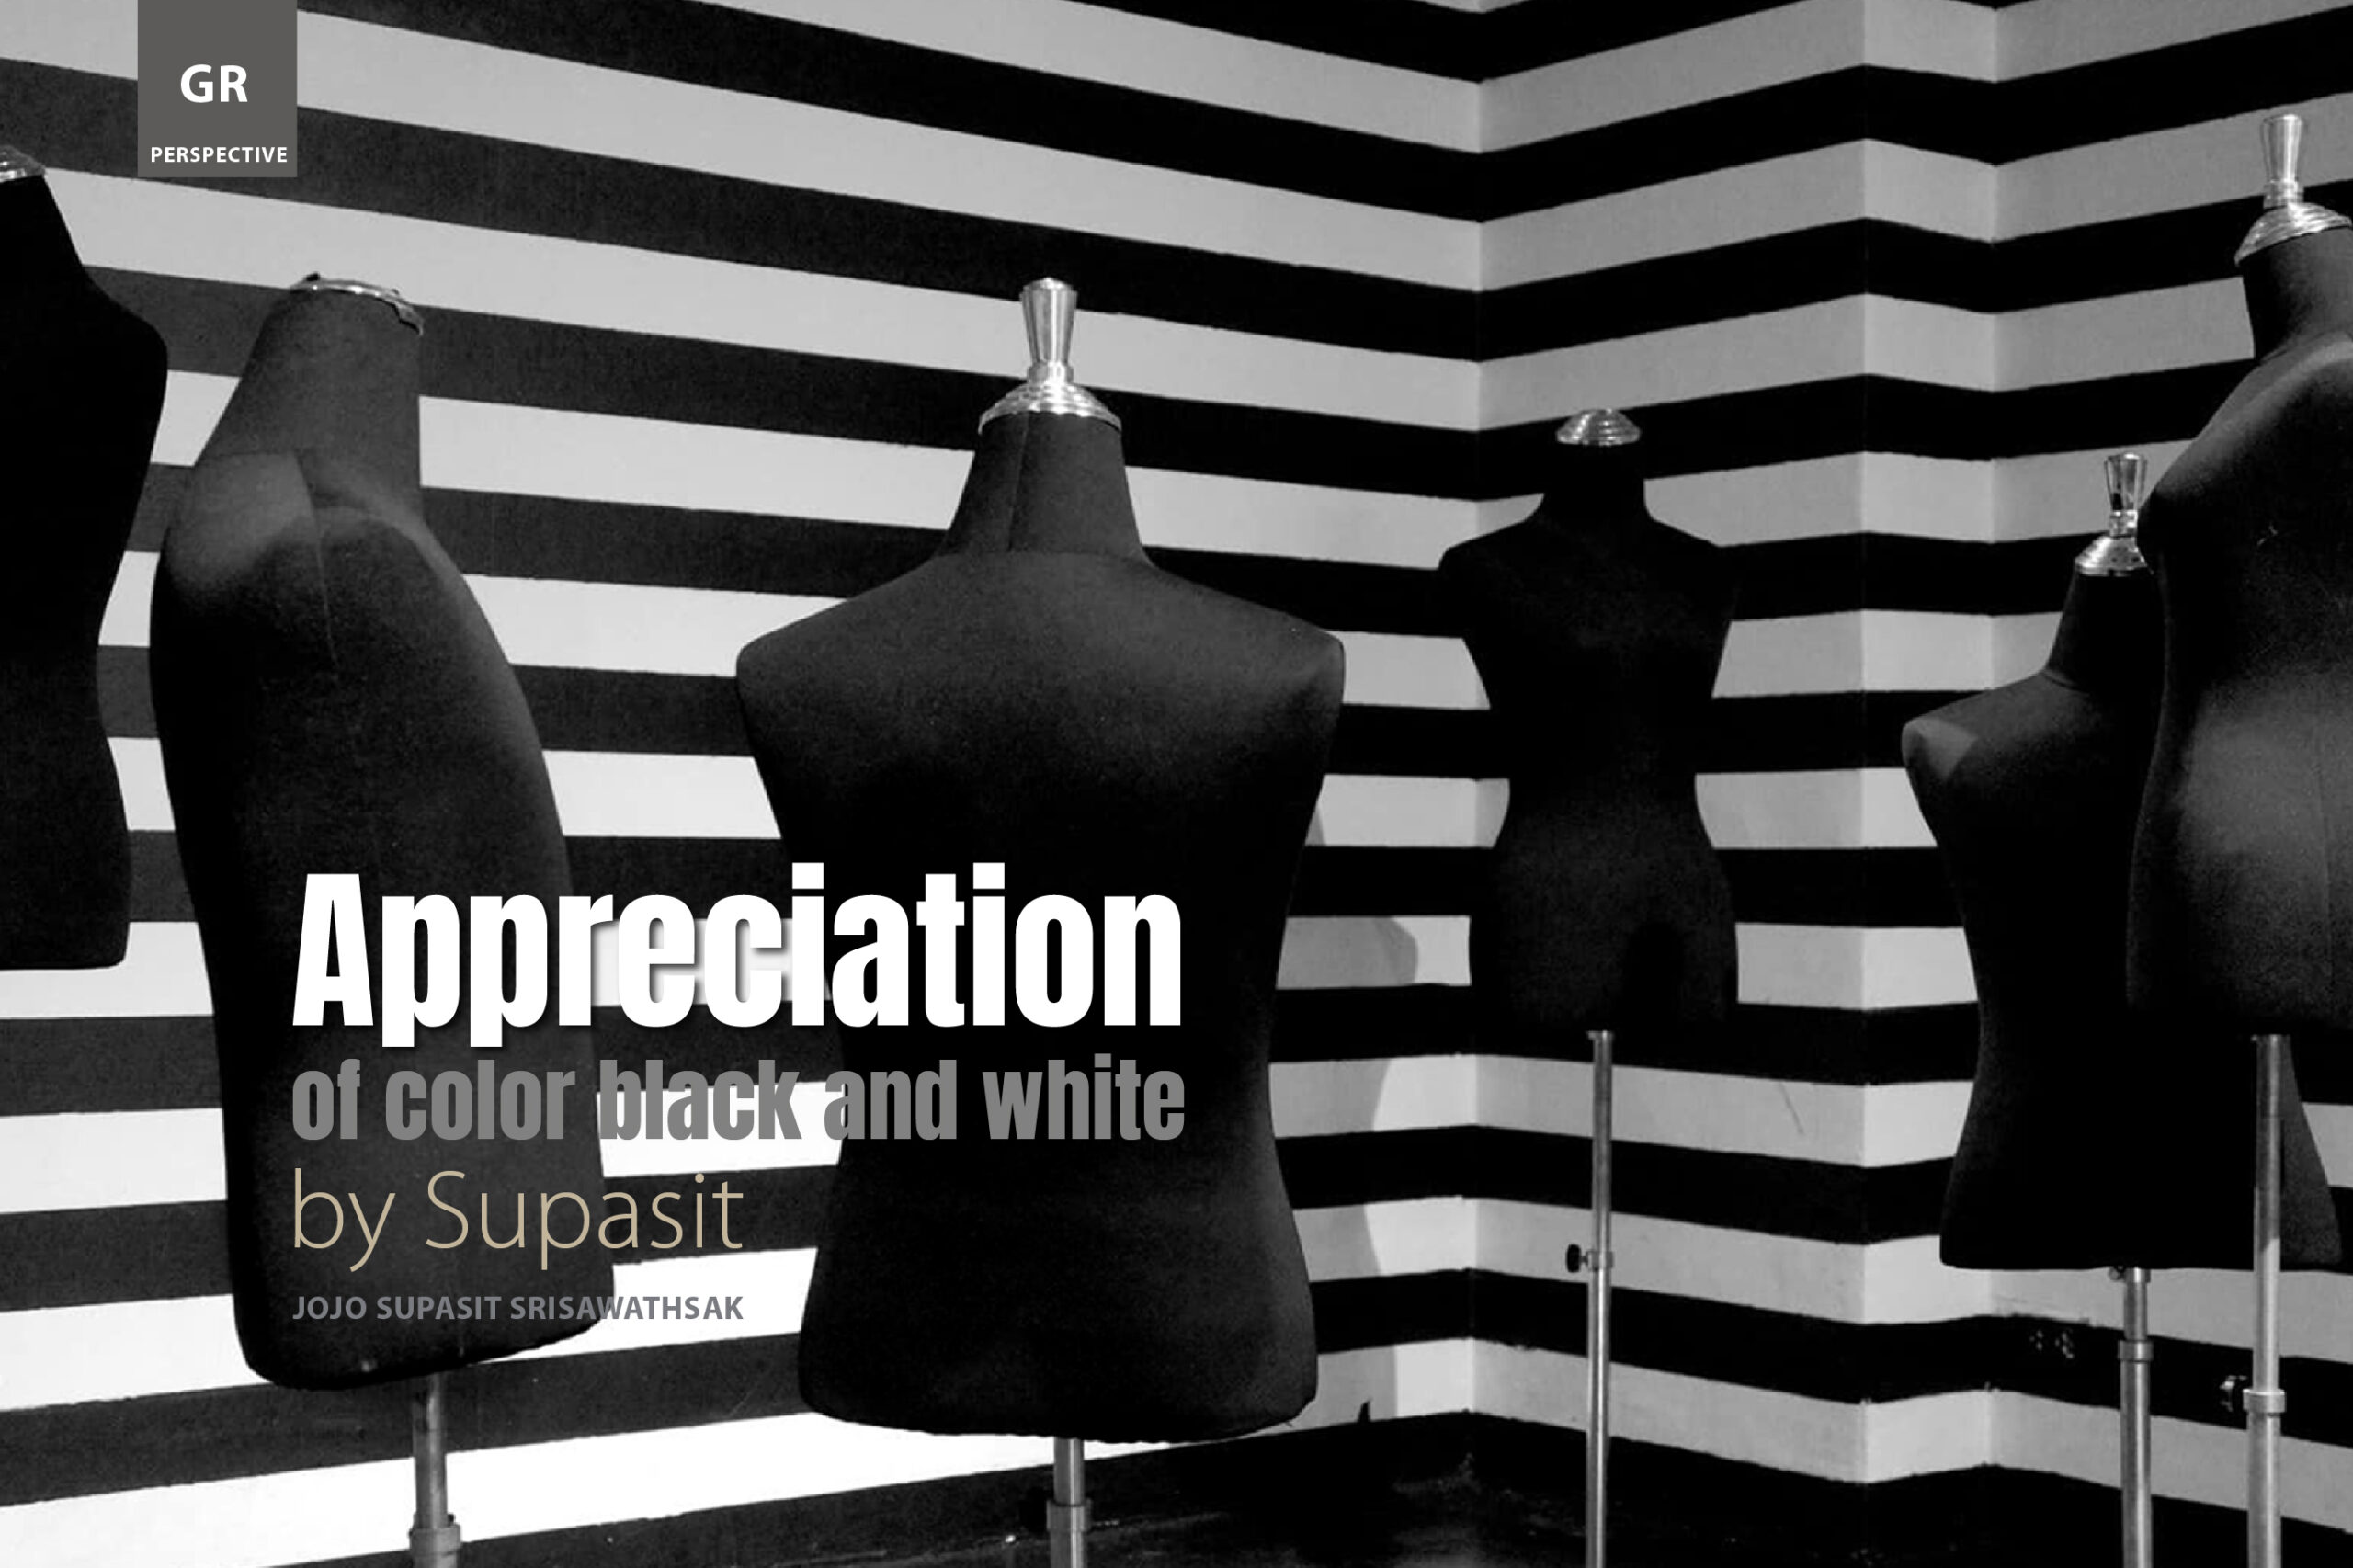 GR PERSPECTIVE : Appreciation of color black and white by Supasit